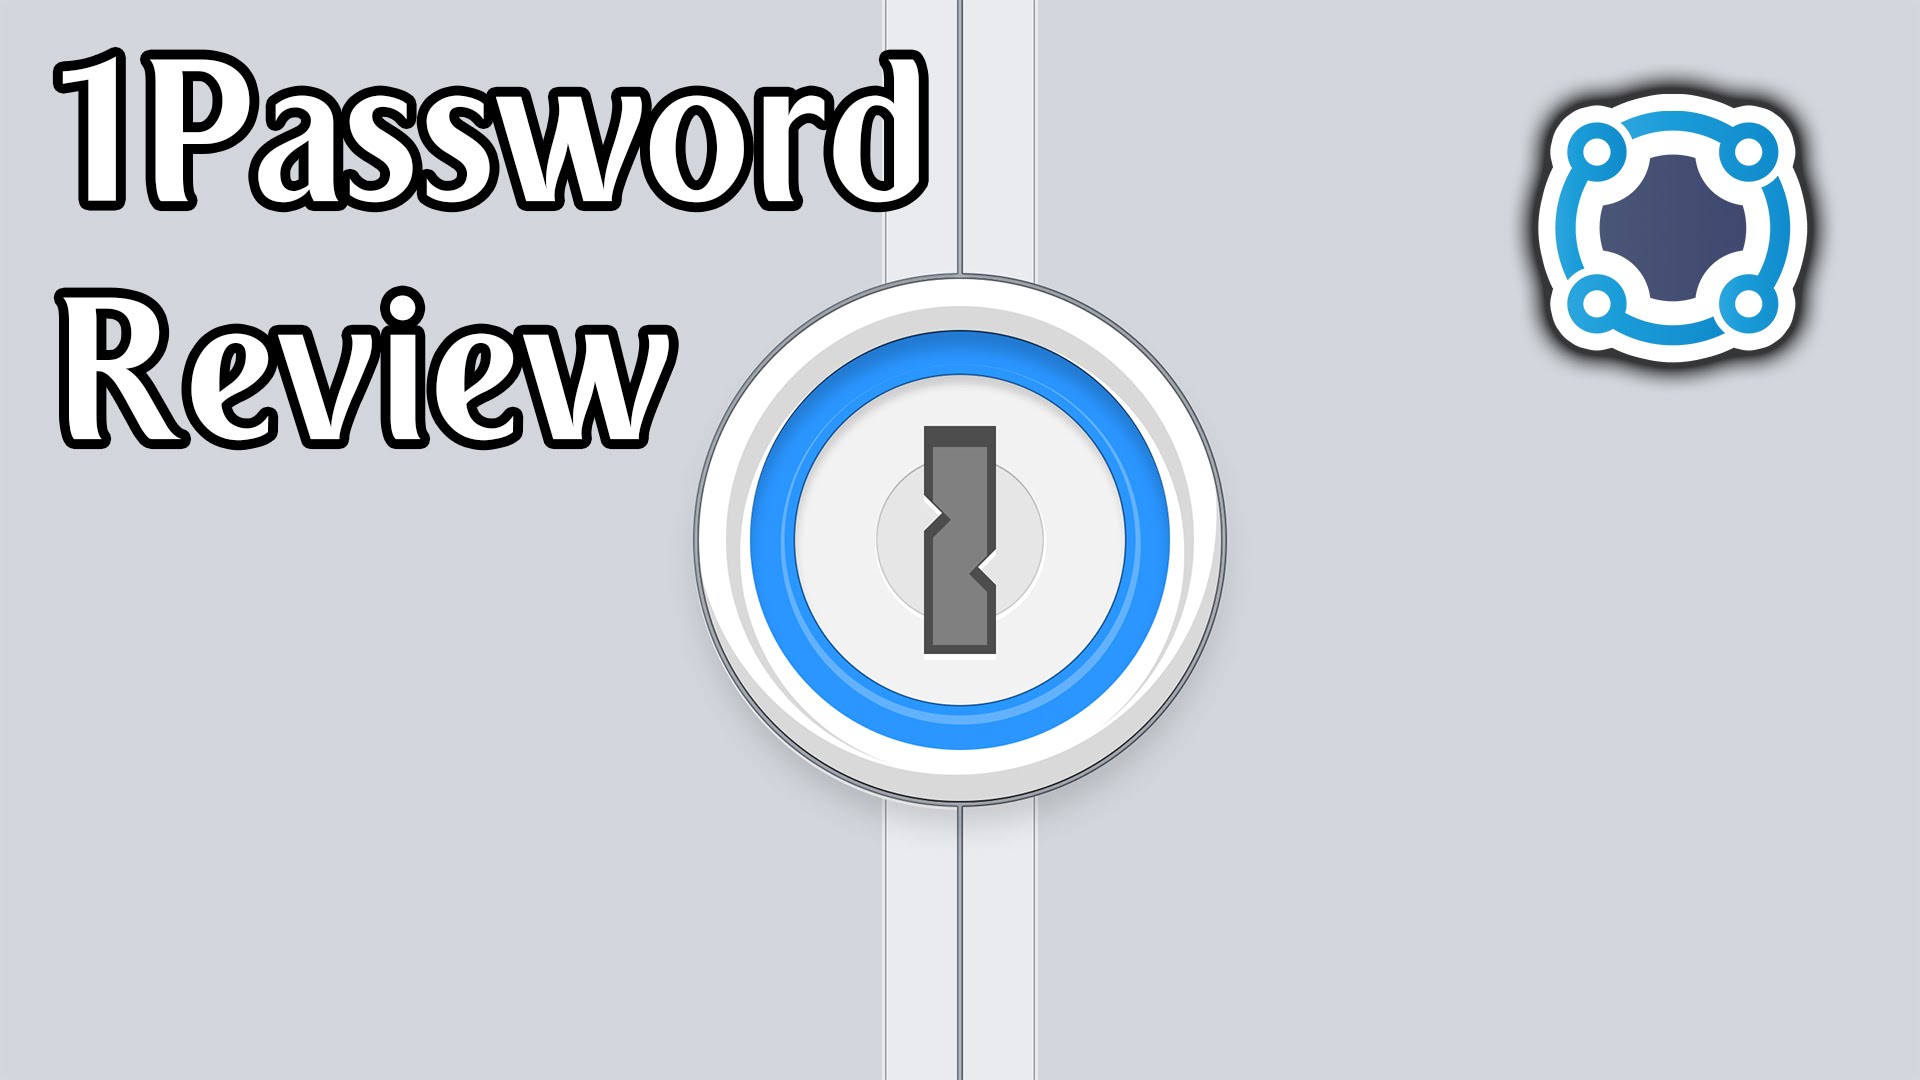 Review: 1Password (Password Manager)